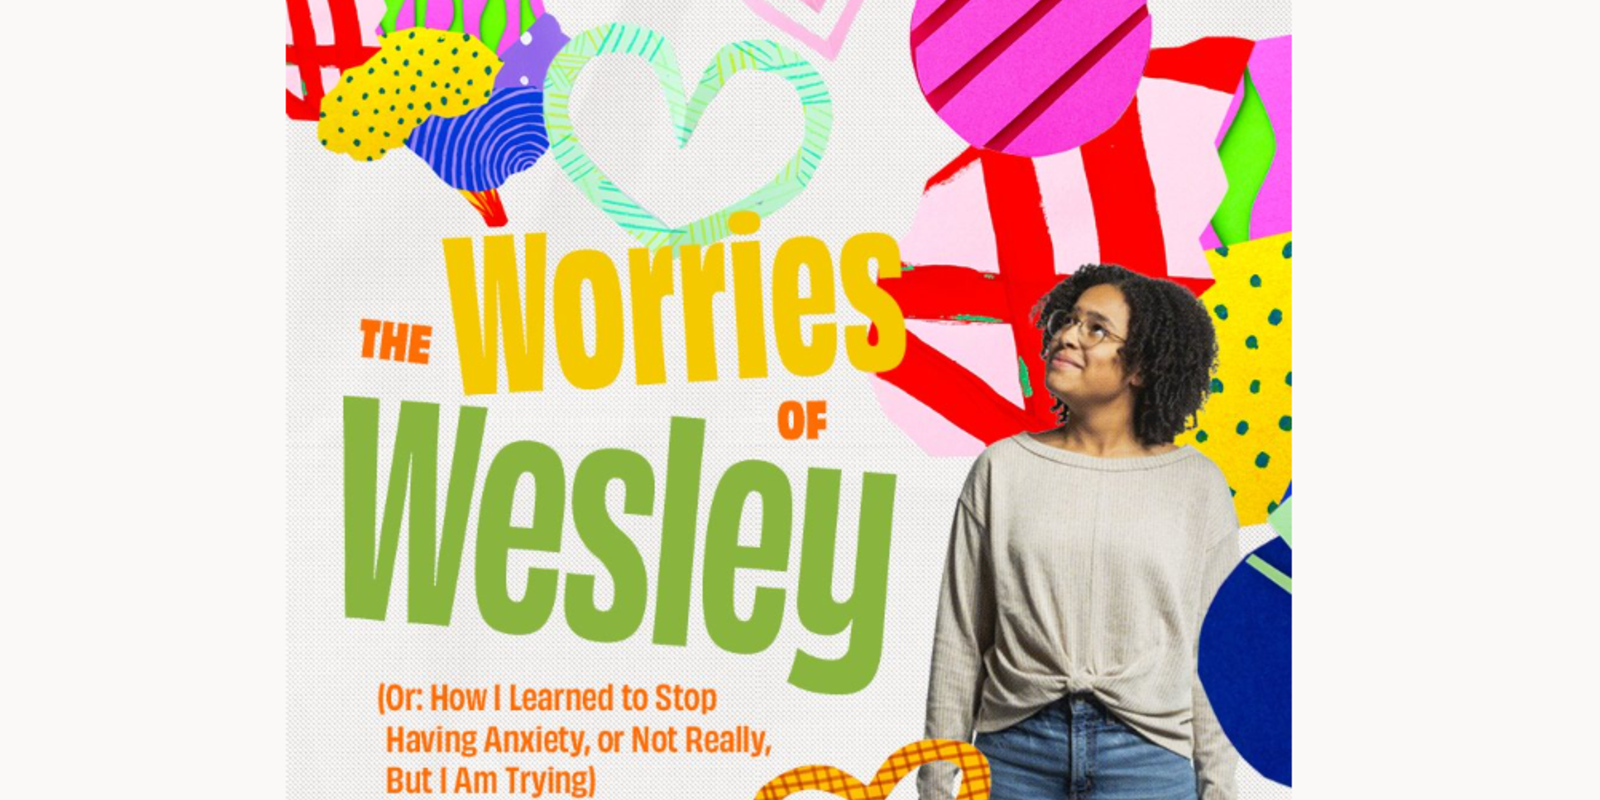 The Worries of Wesley (Or: How I Learned to Stop Having Anxiety, Not Really, But I am Trying)